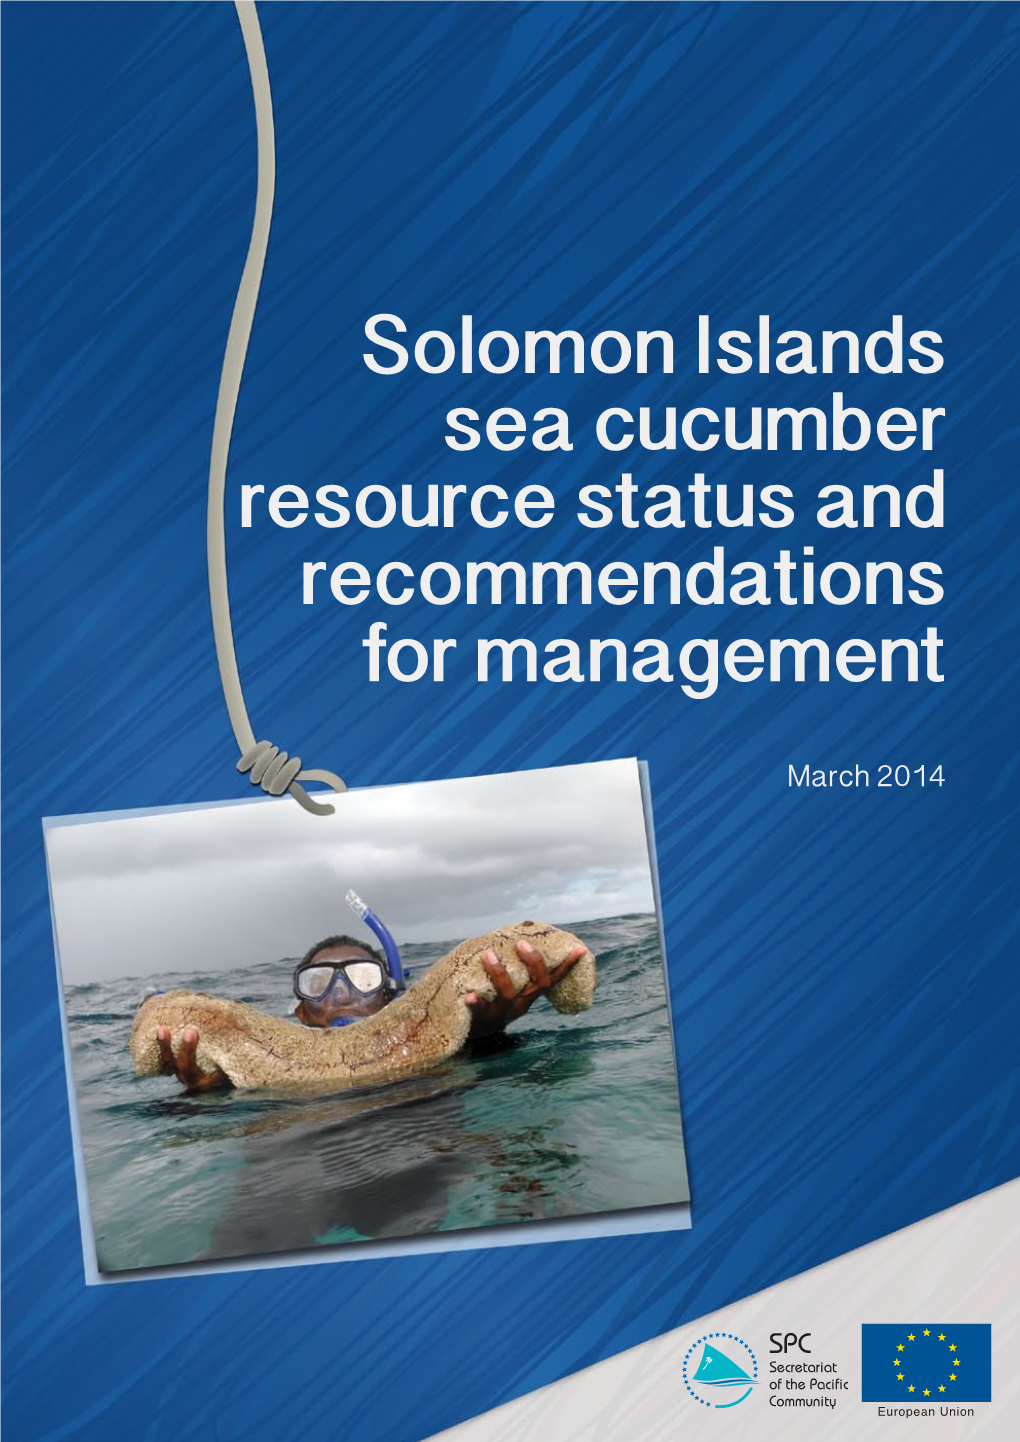 Solomon Islands Sea Cucumber Resource Status and Recommendations for Management